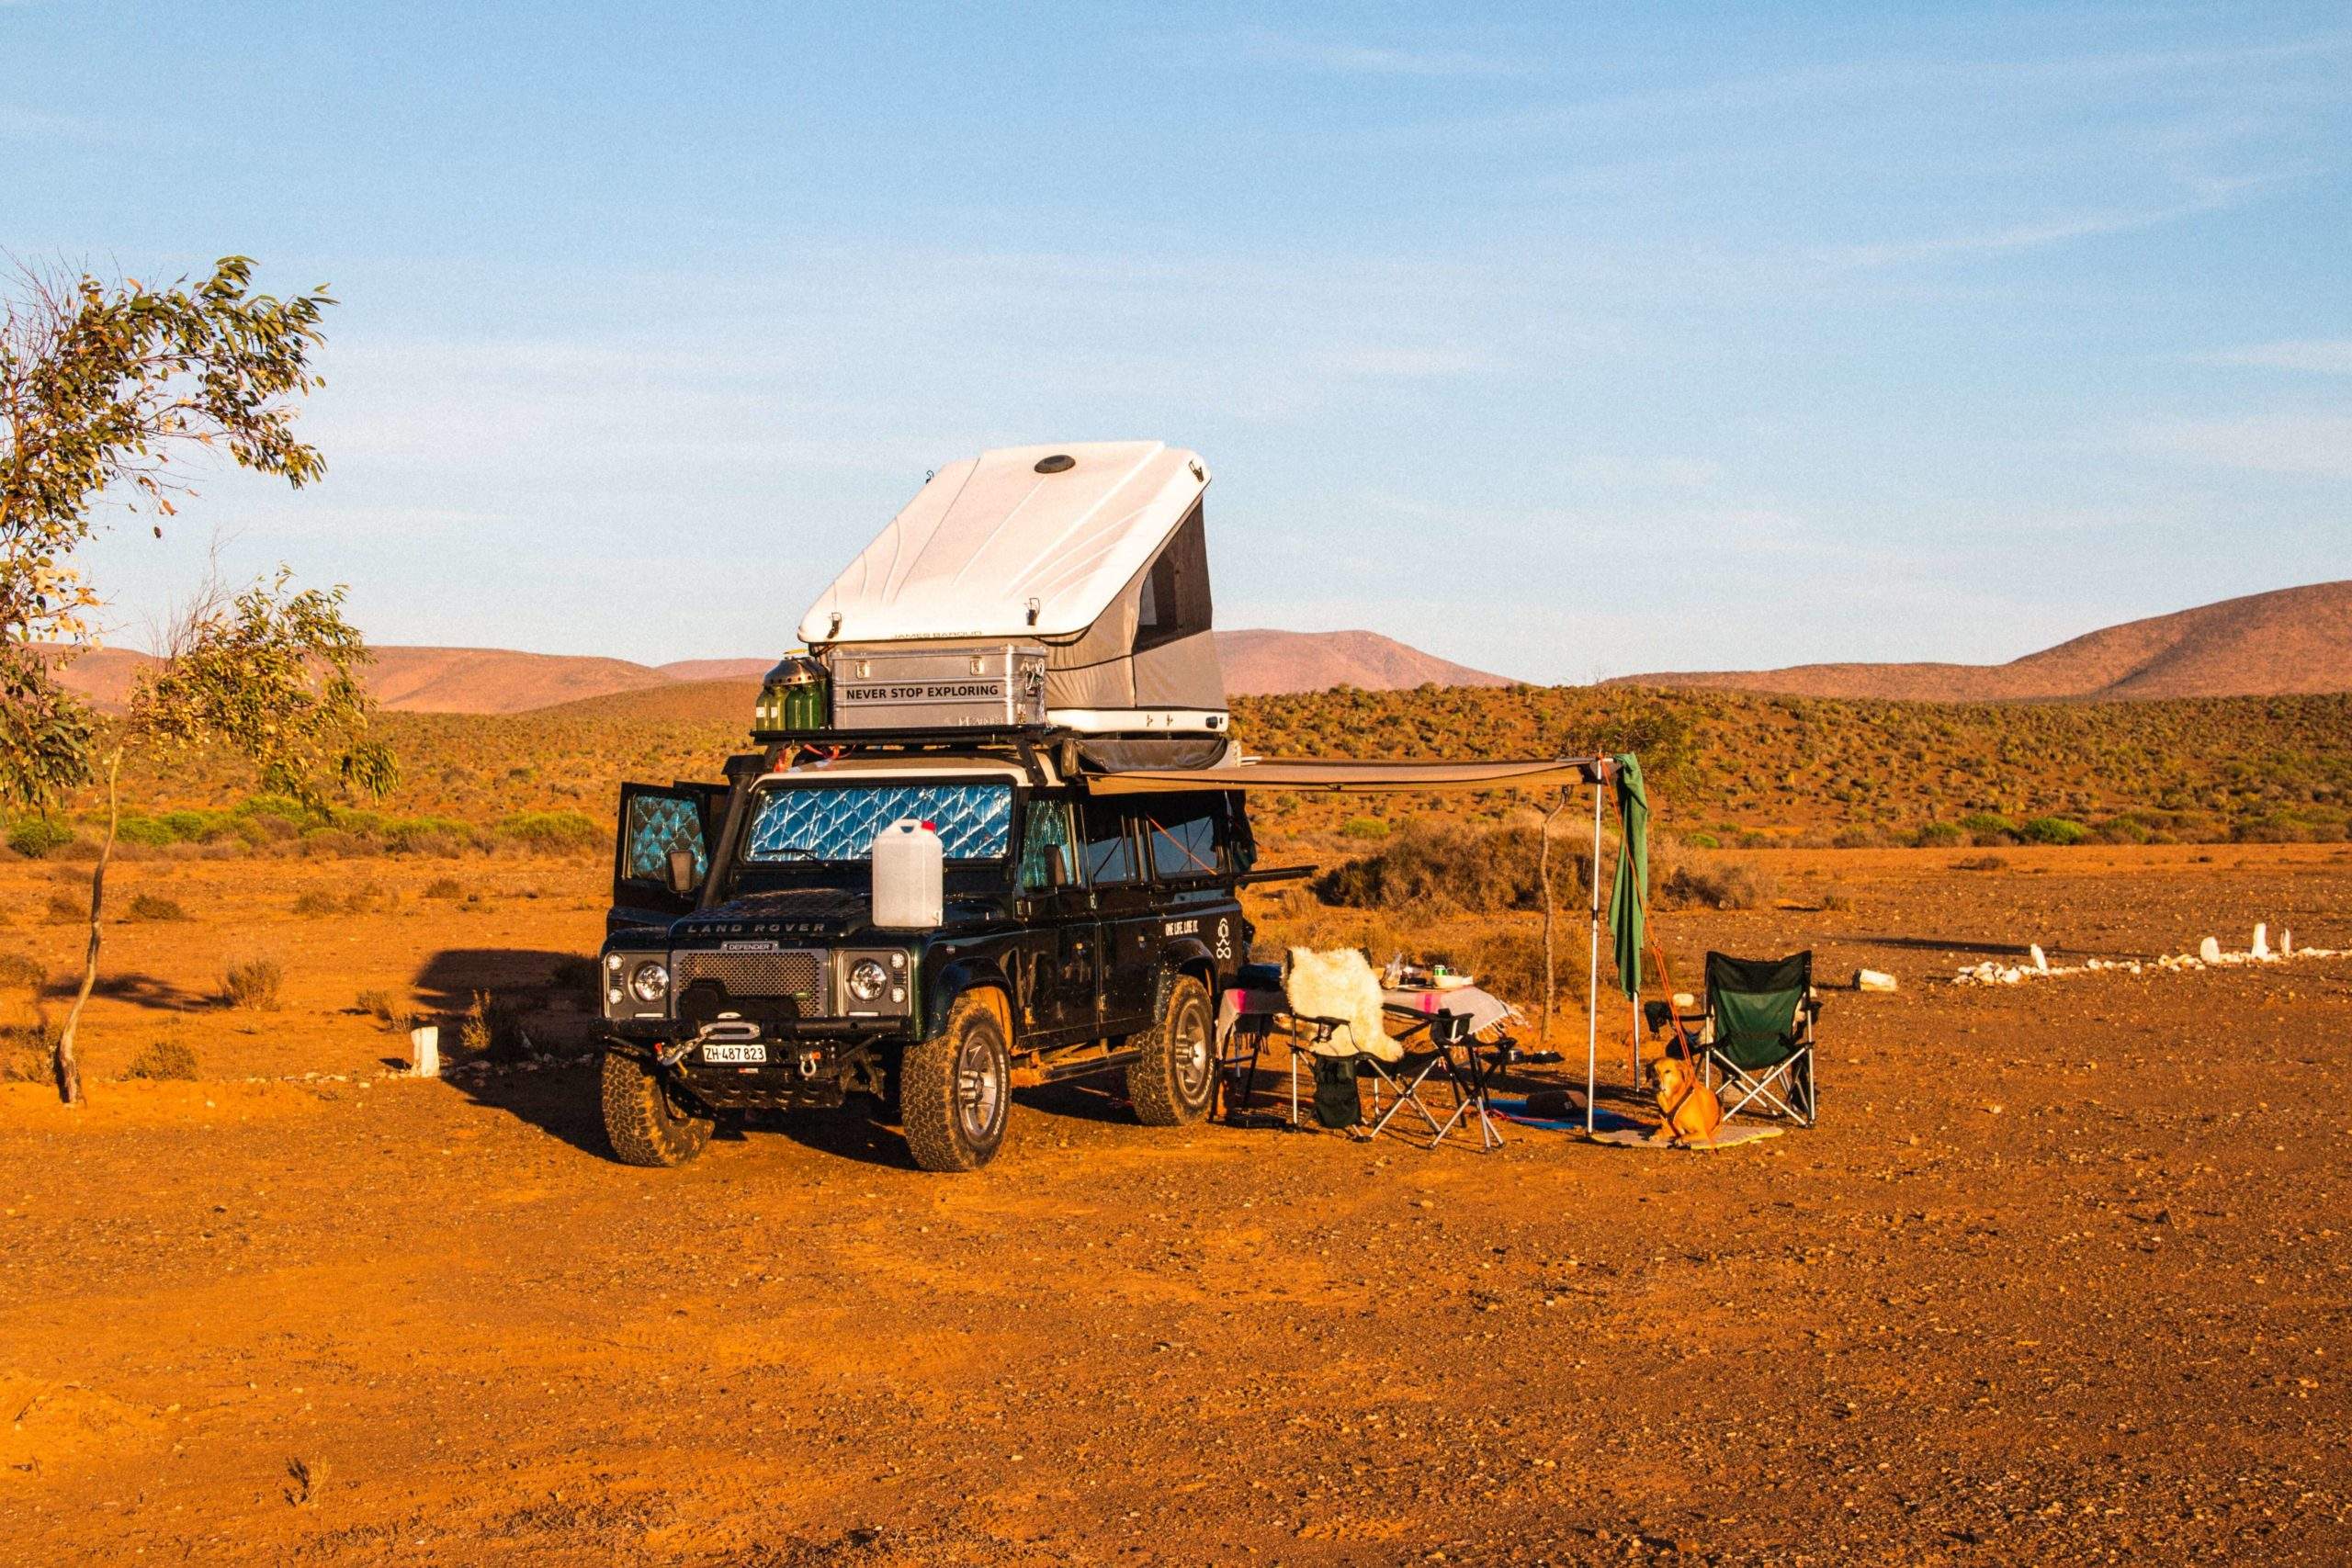 What’s it like to sleep in a rooftop tent?